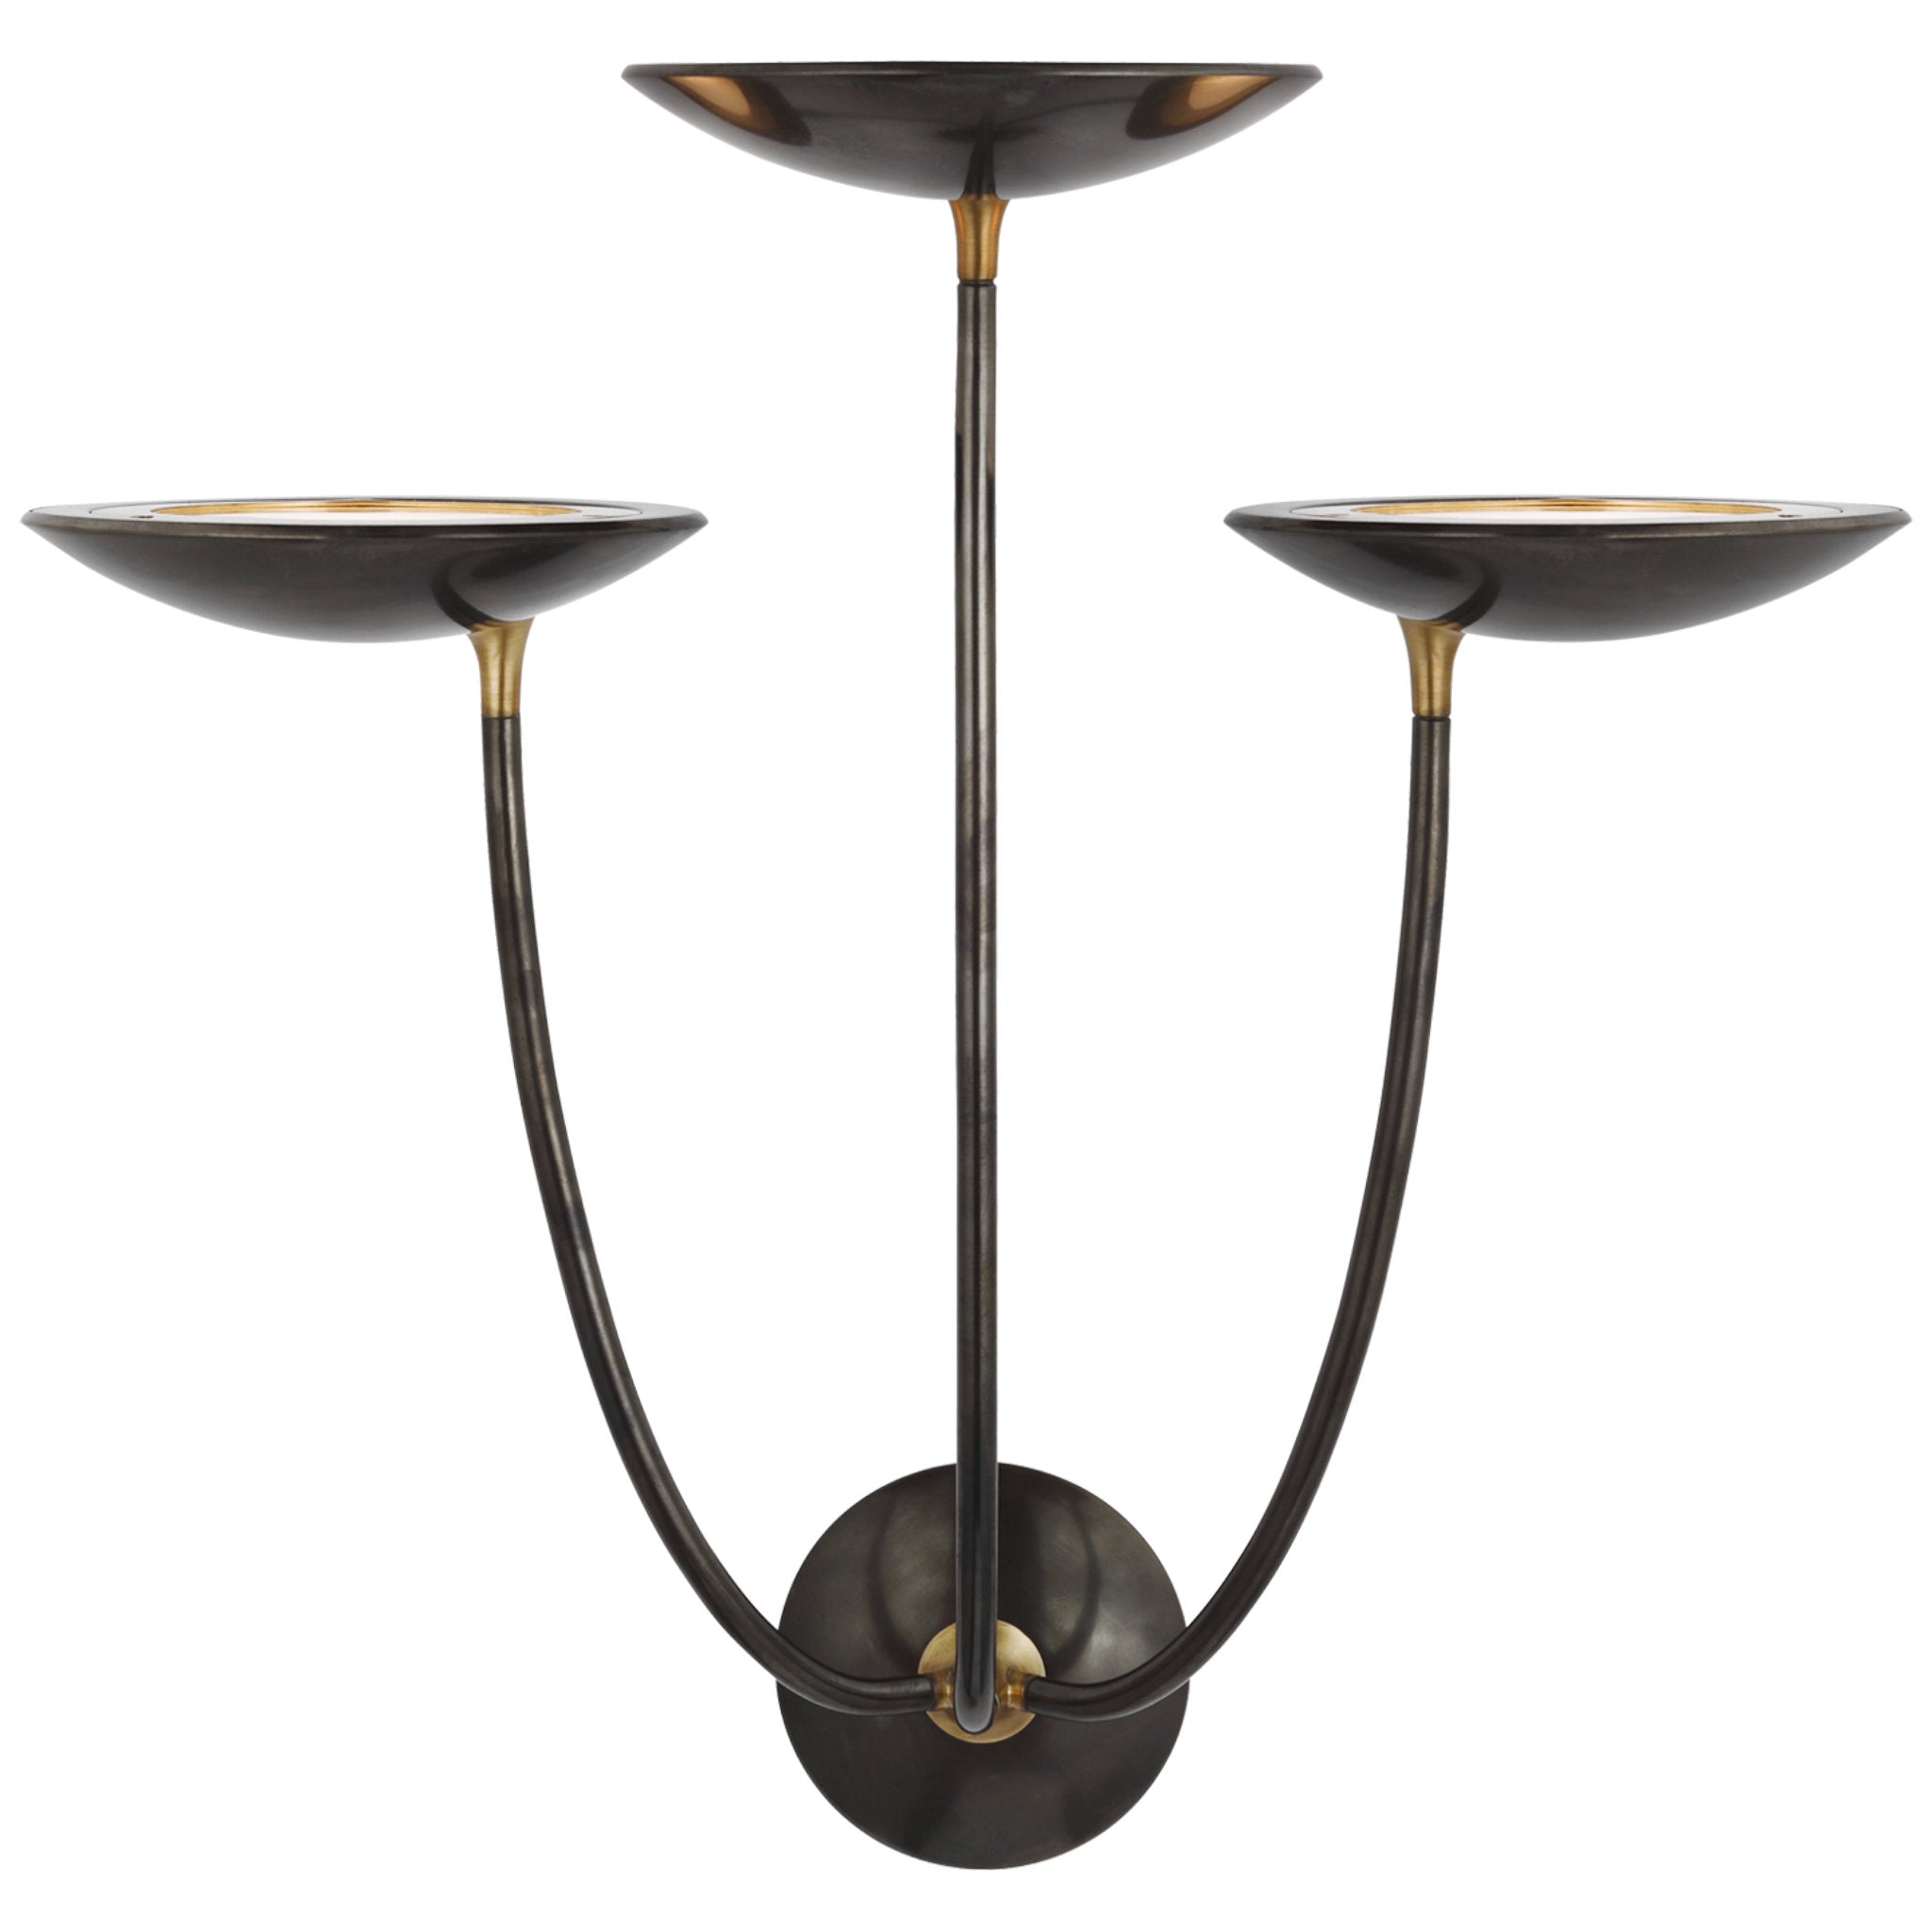 Thomas O'Brien Keira Large Triple Sconce in Bronze and Hand-Rubbed Antique Brass